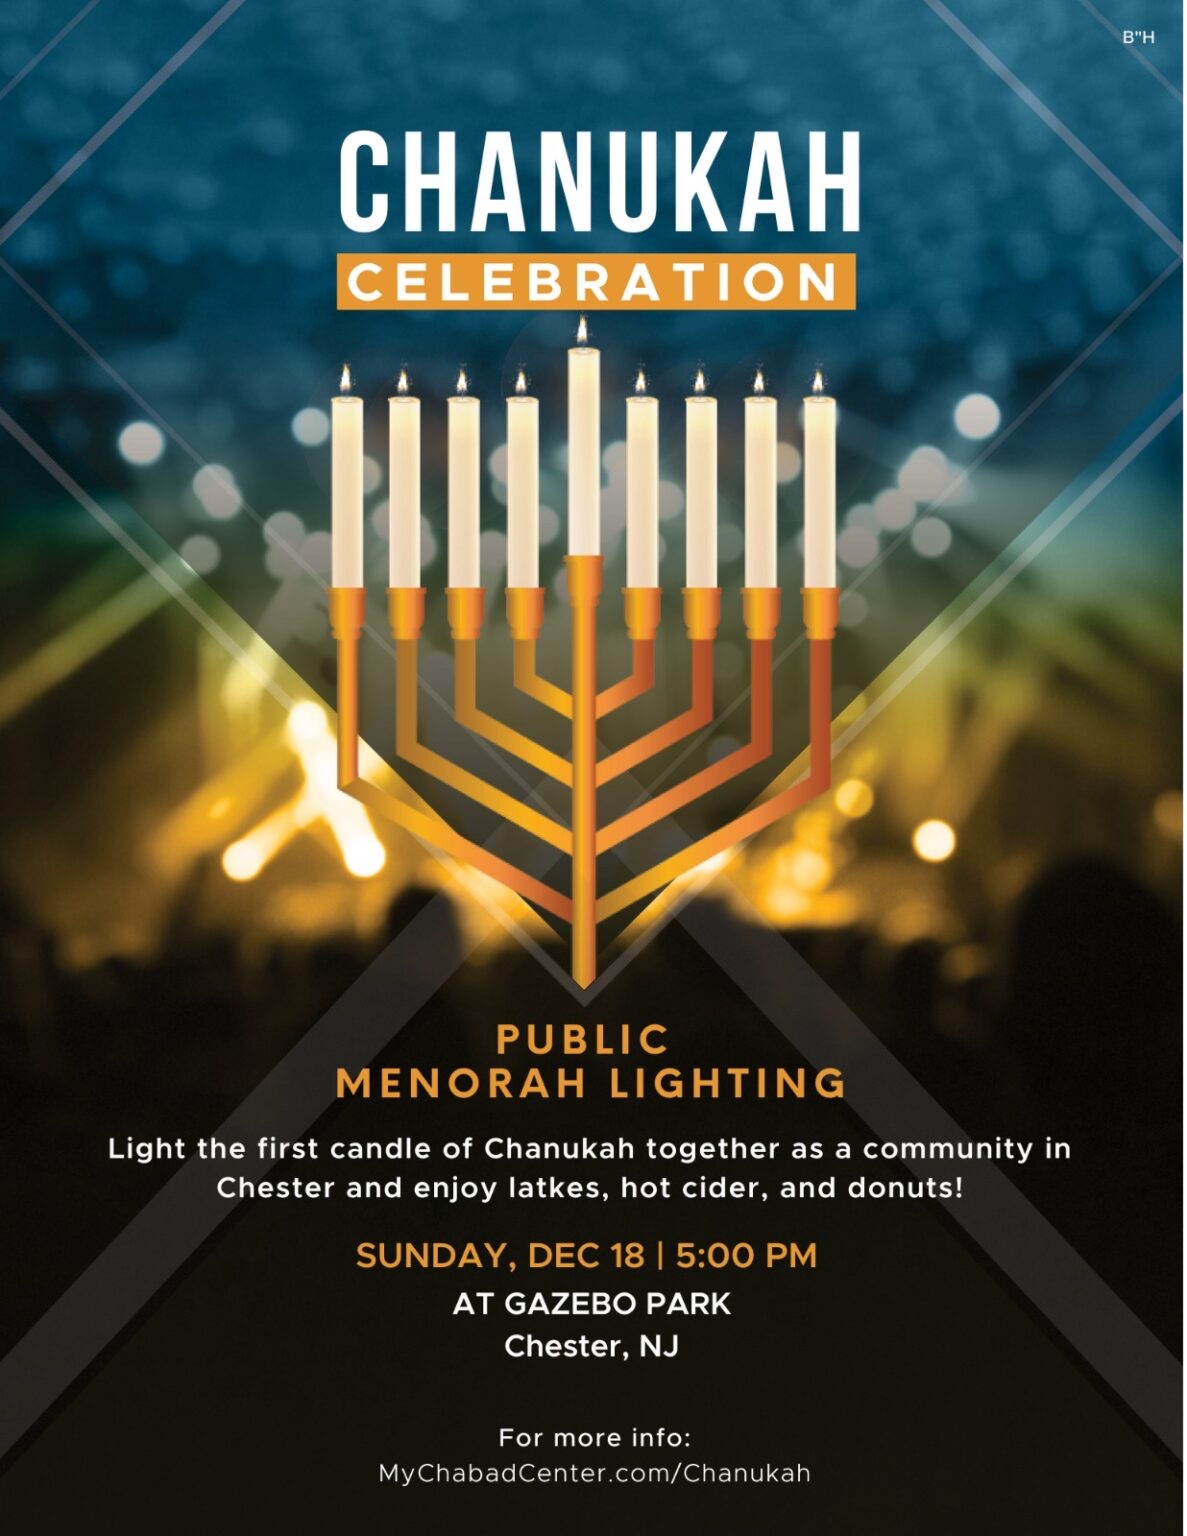 Join us to light the first candle of Chanukah together as a community at Municipal Field Gazebo in downtown Chester and enjoy latkes, hot cider, and donuts! Sponsored by the Chabad Jewish Center  Date: Sunday, December 18 Location: Municipal Field Gazebo, 134 Main Street, Chester, NJ 07930 Time: 5-7PM More info: MyChabadCenter.com/Chanukah